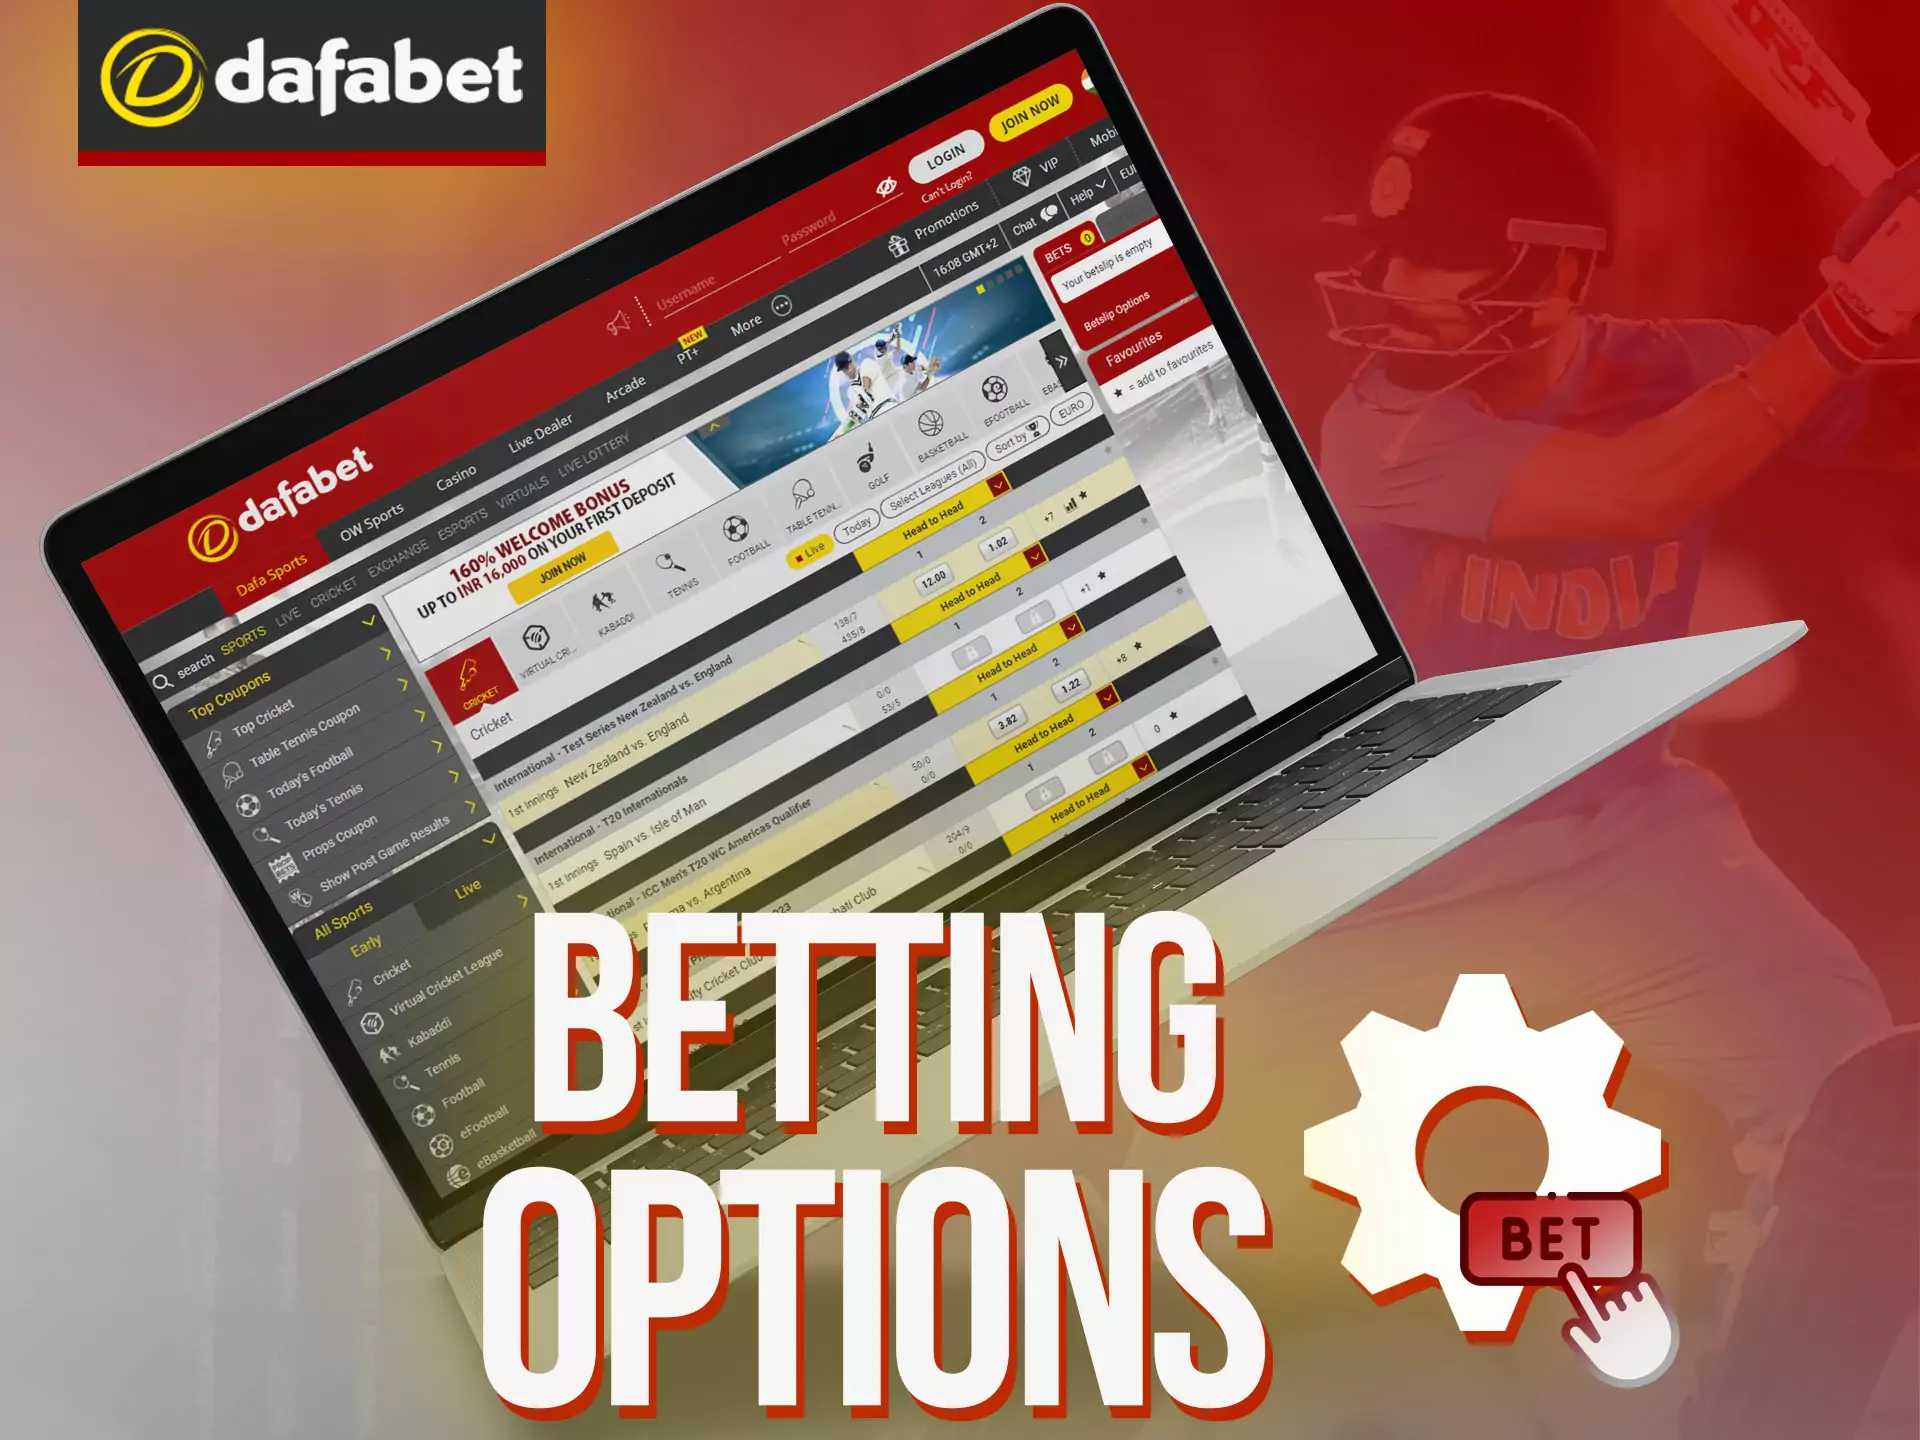 Place bets using the different betting options at Dafabet.